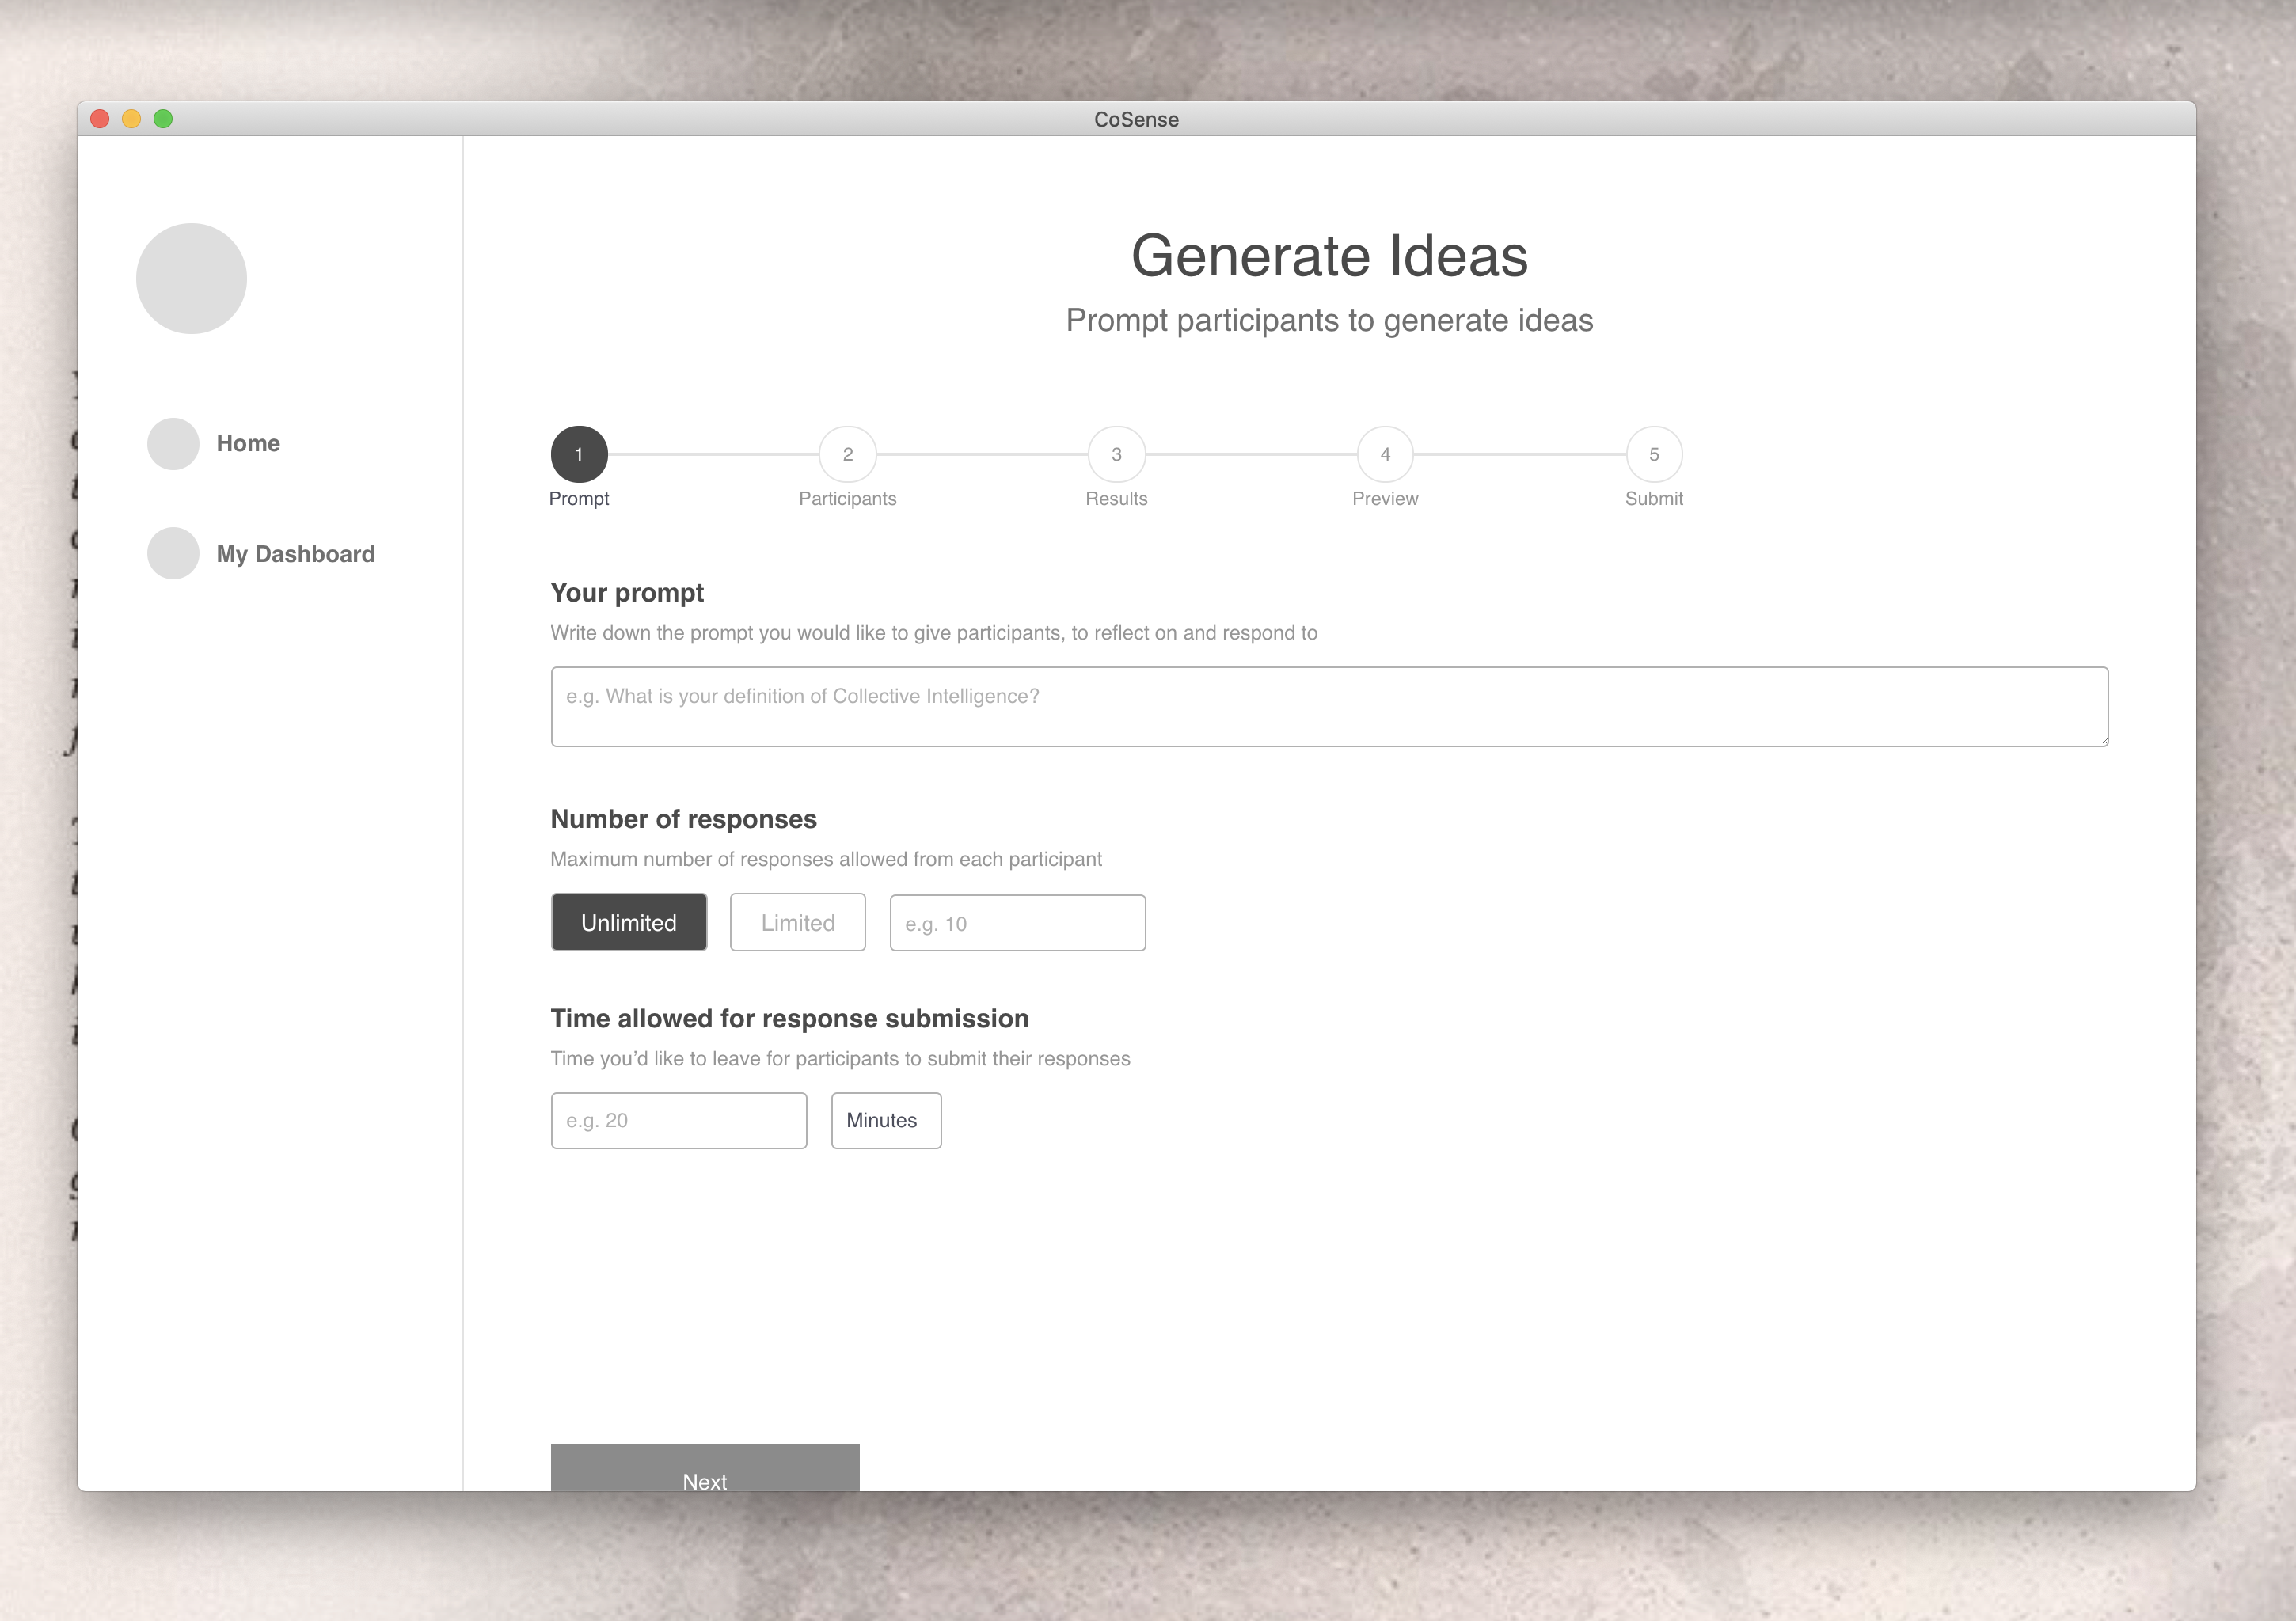 cosense app screen for configuring a generate ideas flow